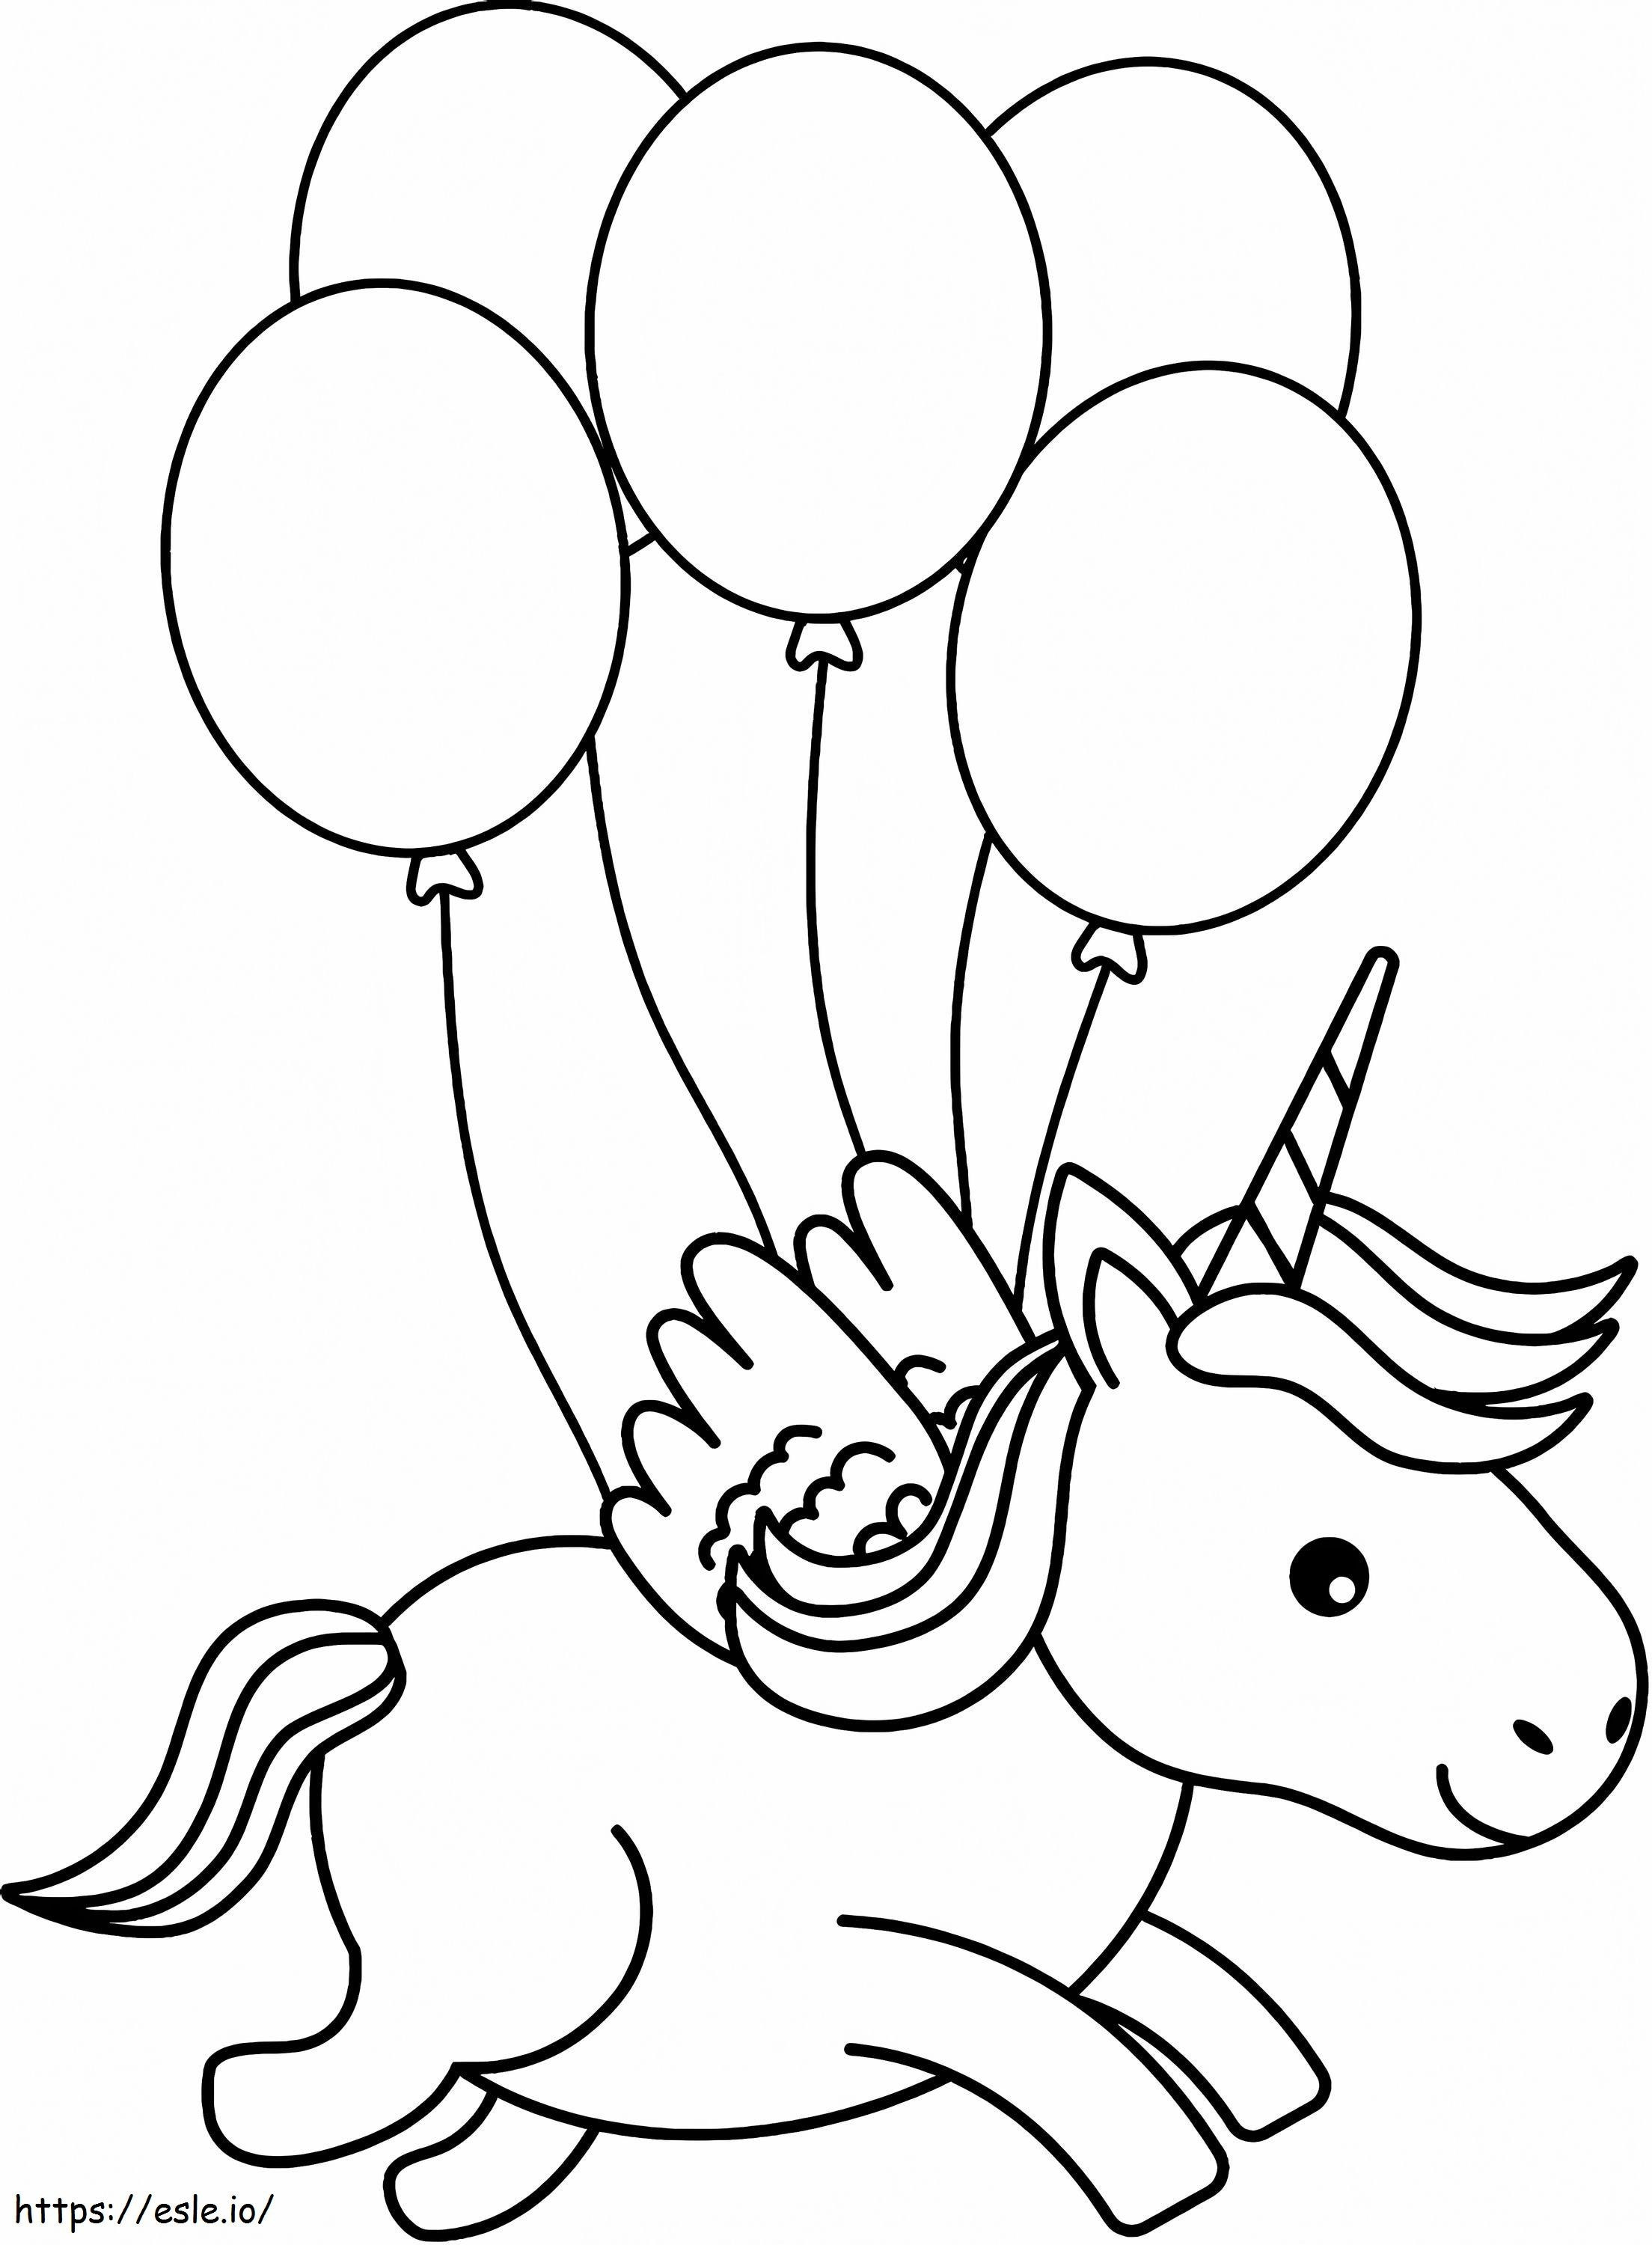 1563411384 Little Unicorn With Balloons A4 coloring page